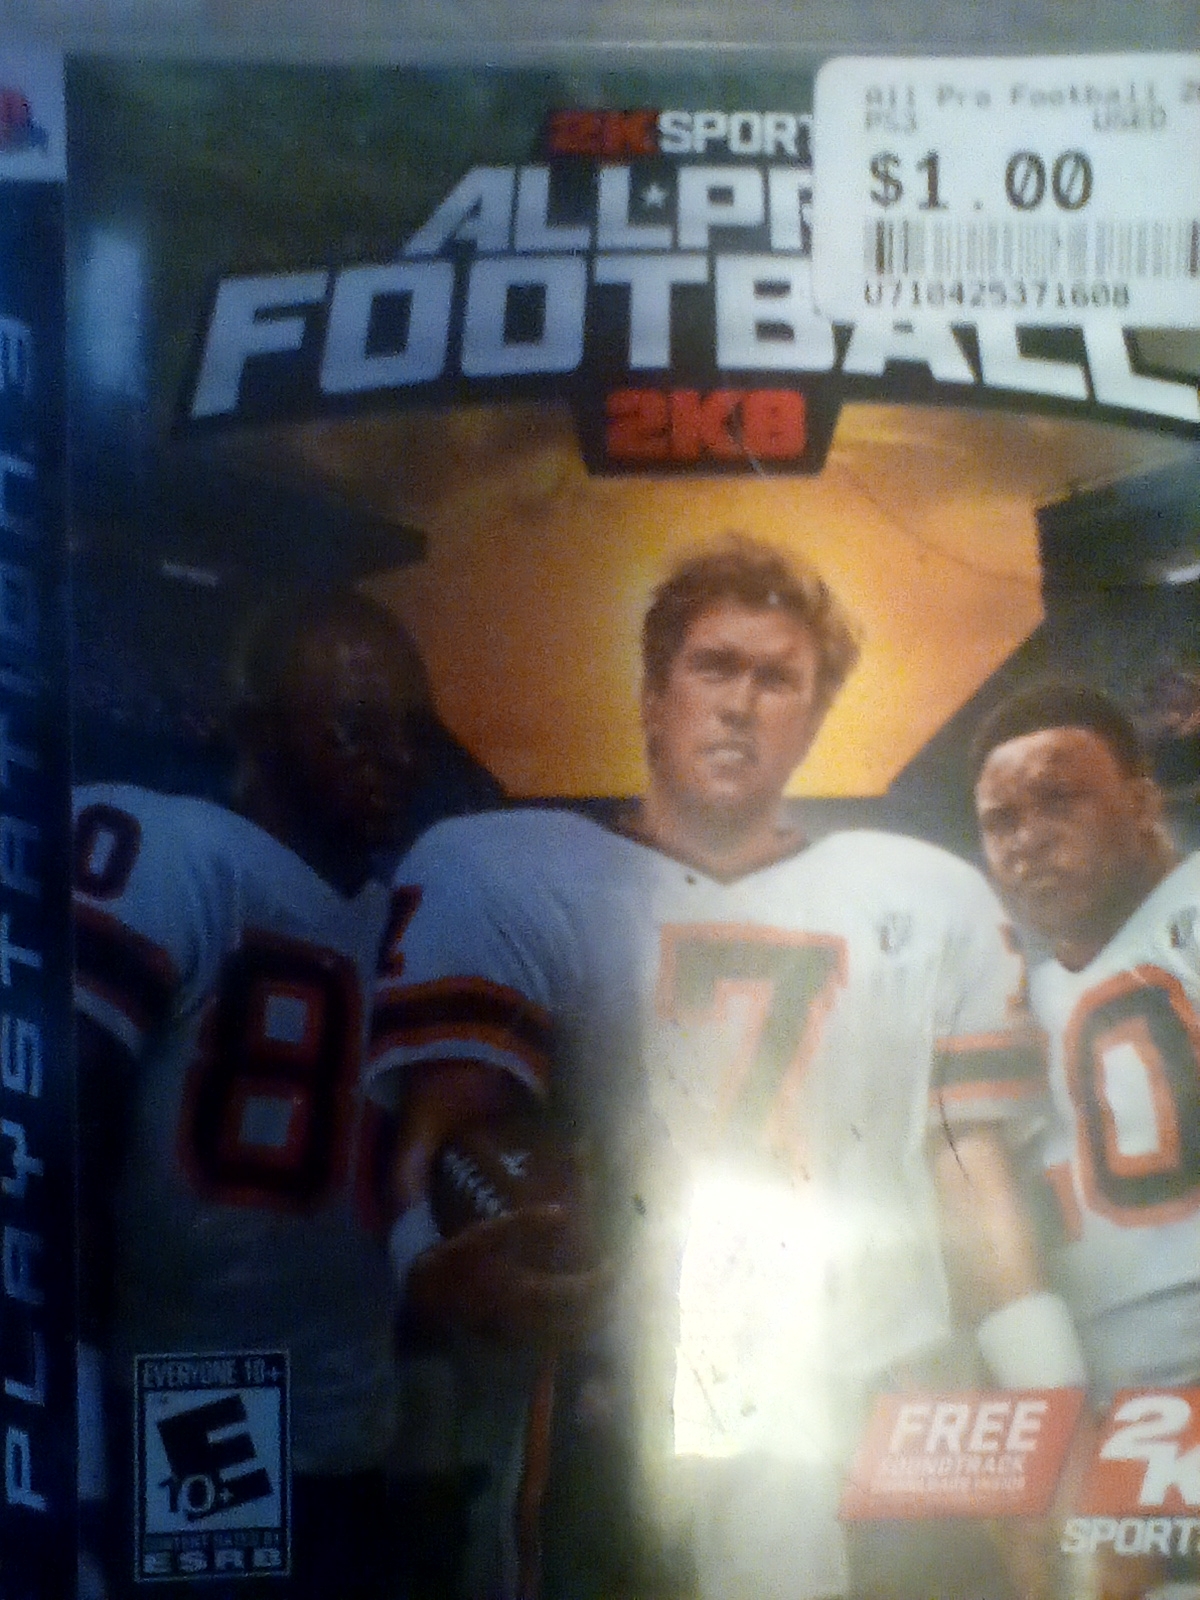 JML101582: All Pro Football 2K8 [Point Differential] (Playstation 3) -2 points on 2020-07-27 22:15:50